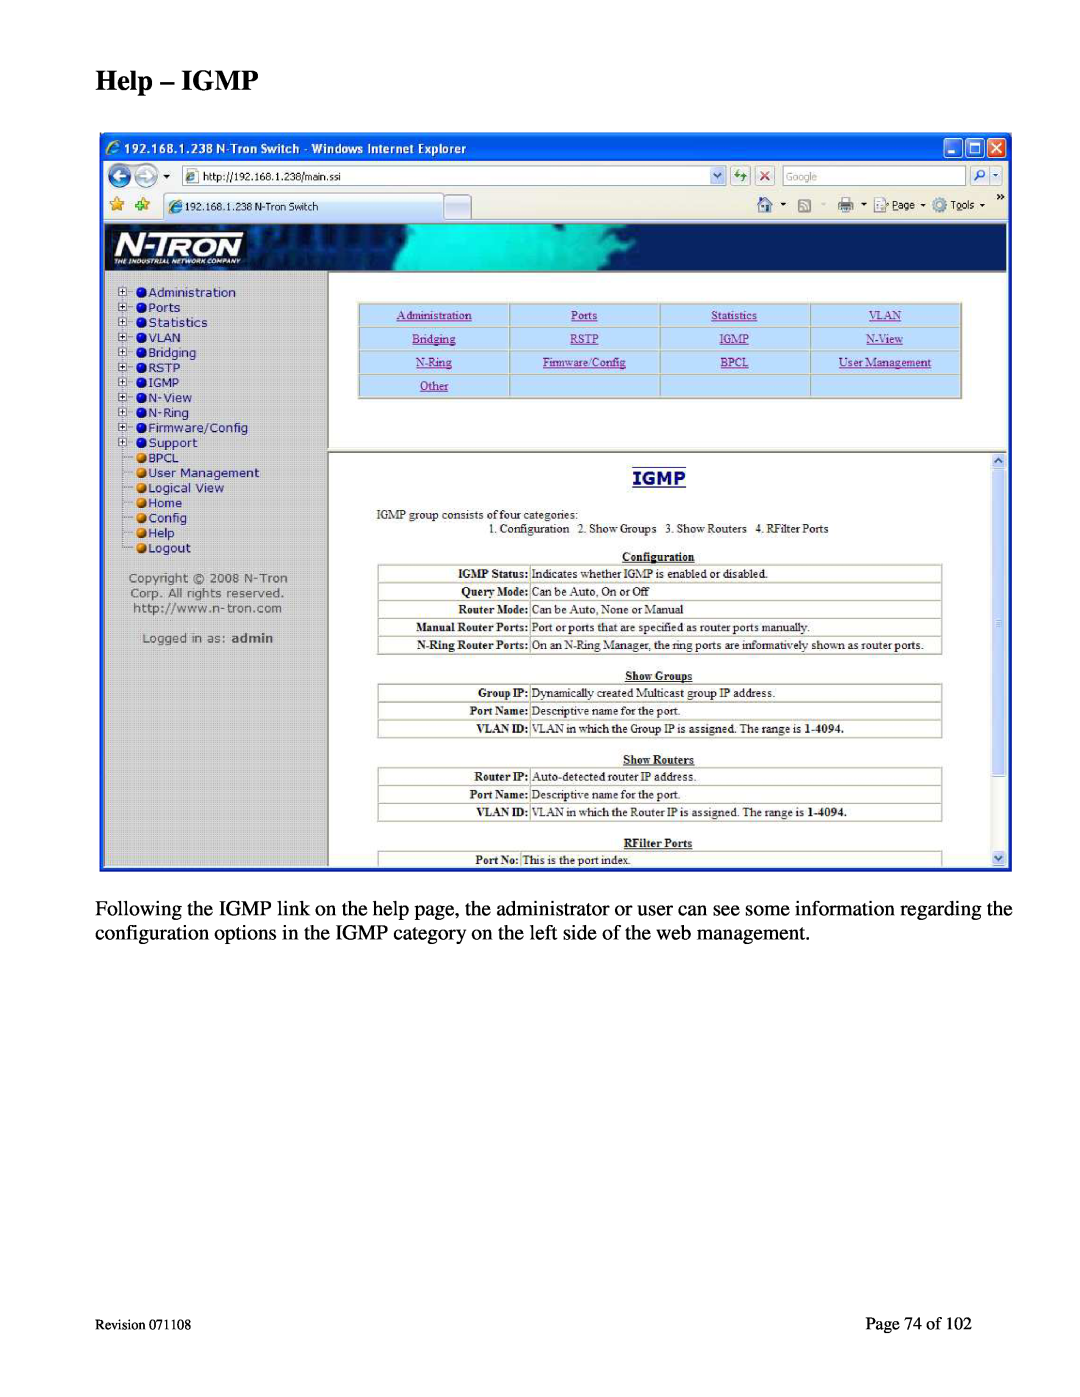 N-Tron 708M12 user manual Help - IGMP, Page 74 of, Revision 